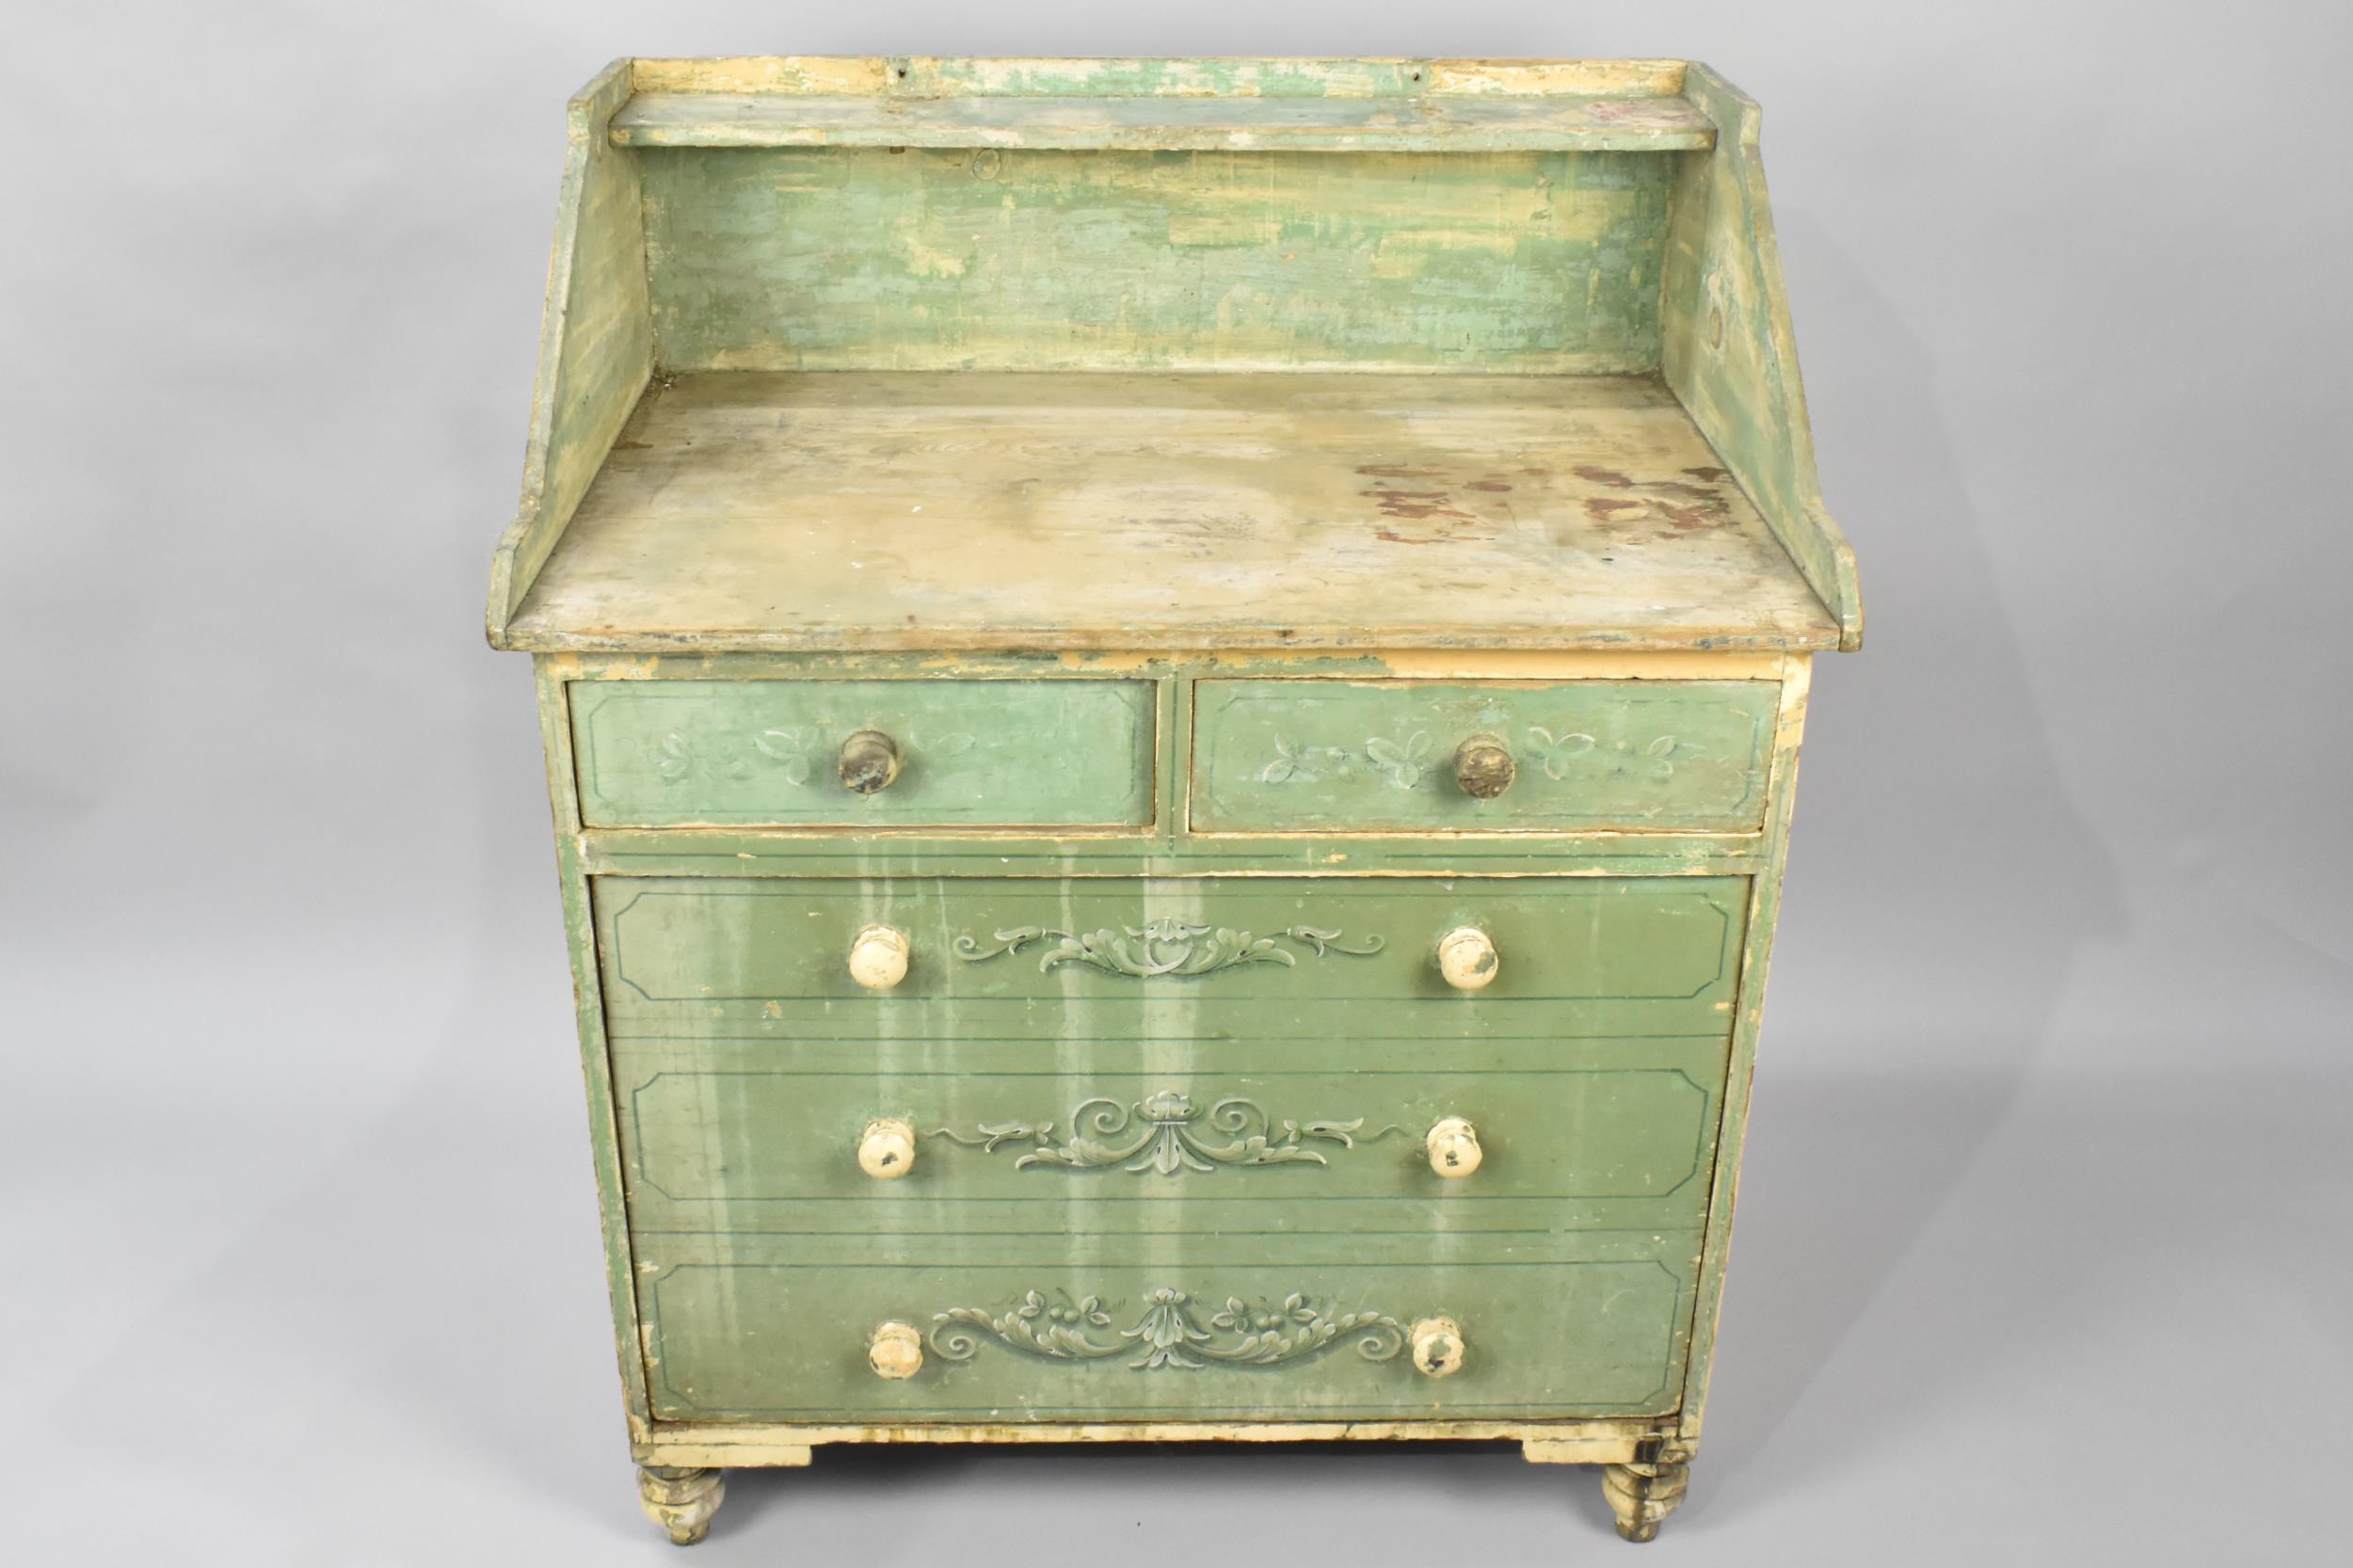 A 19th Century Painted Pine Washstand with Trompe L'oeil Decoration, Reverse Lining and Acanthus - Image 3 of 4